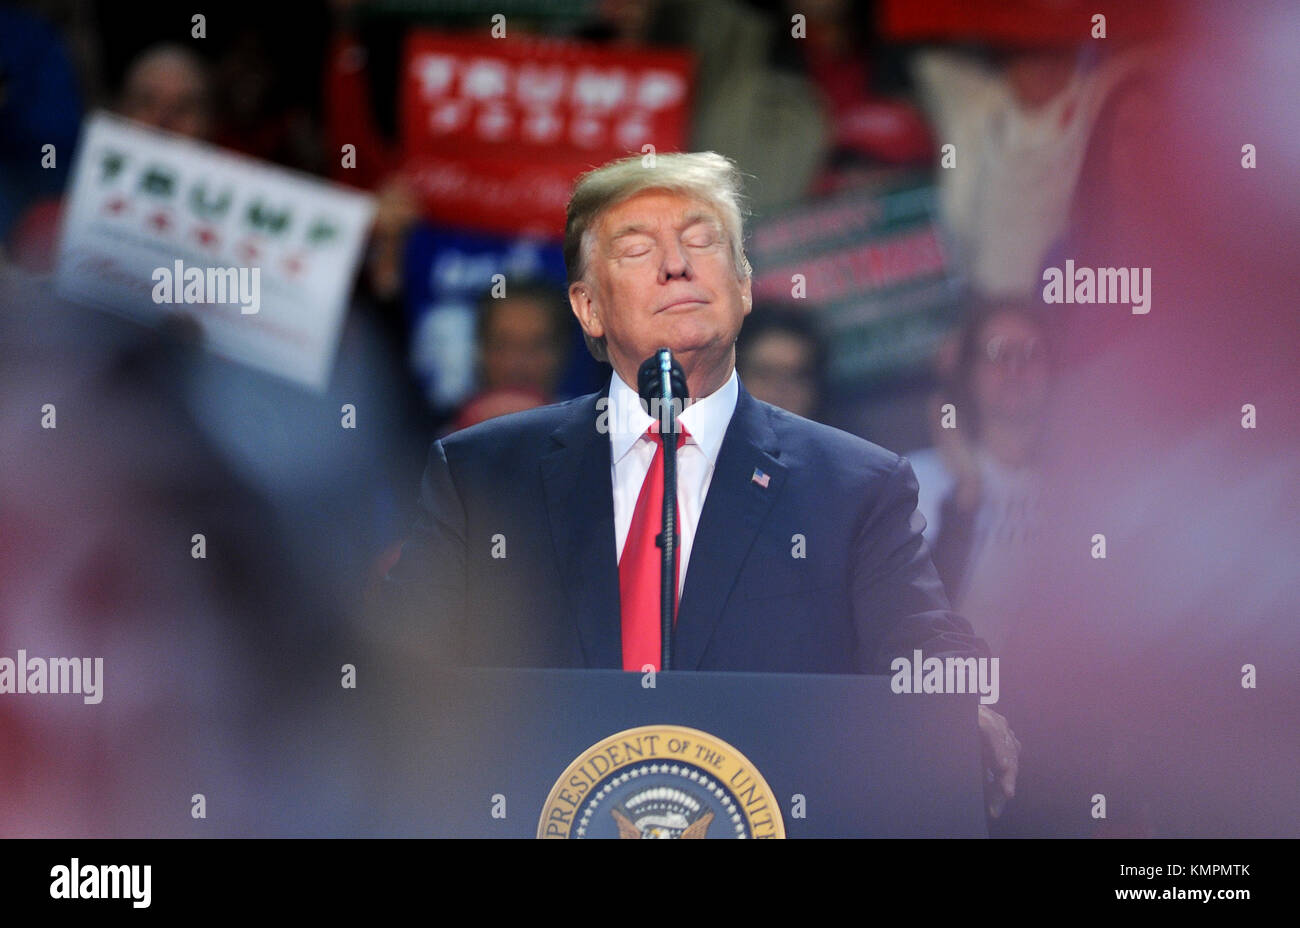 Pensacola, Florida, USA. 8th December, 2017. U.S. President Donald Trump speaks at a campaign rally on December 8, 2017 at the Pensacola Bay Center in Pensacola, Florida. Credit: Paul Hennessy/Alamy Live News Stock Photo